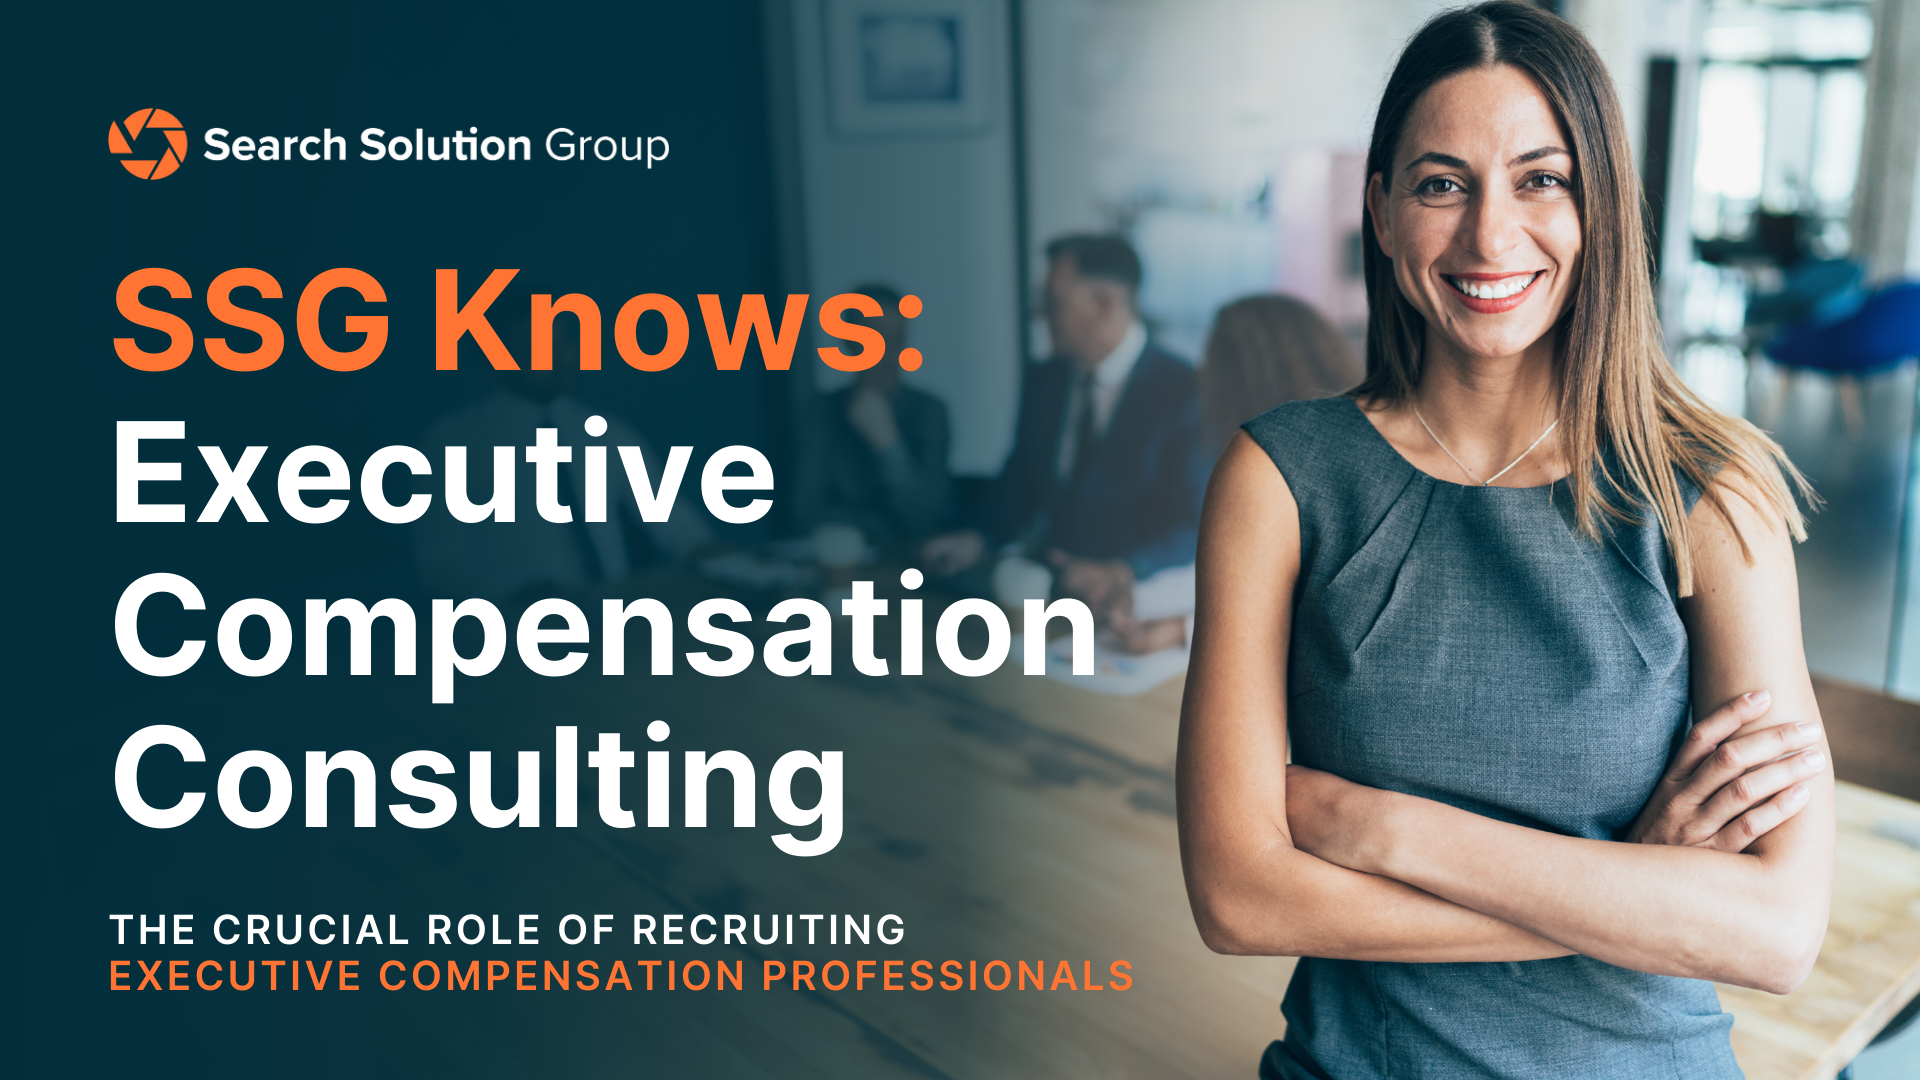 SSG Knows: Executive Compensation Consulting